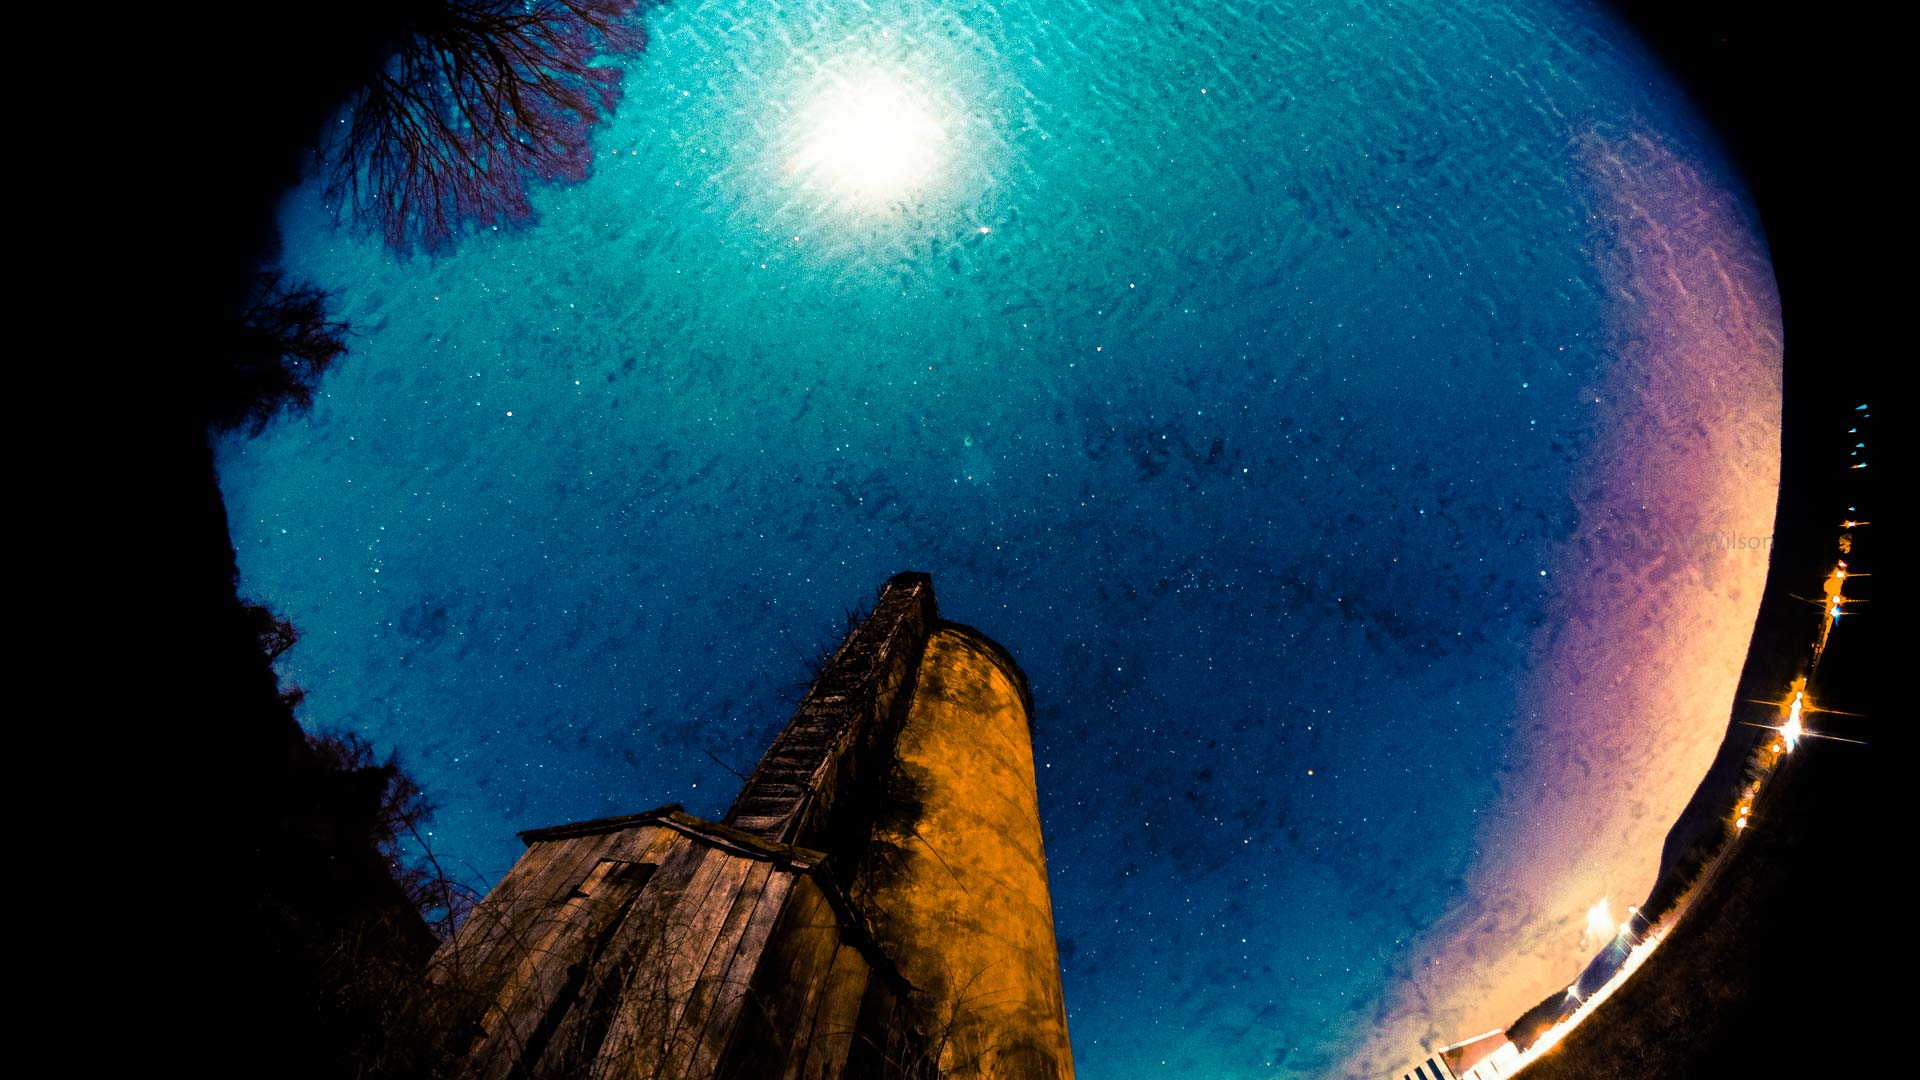 Fisheye view facing upward next a silo with the night sky, overlain with gentle ripples